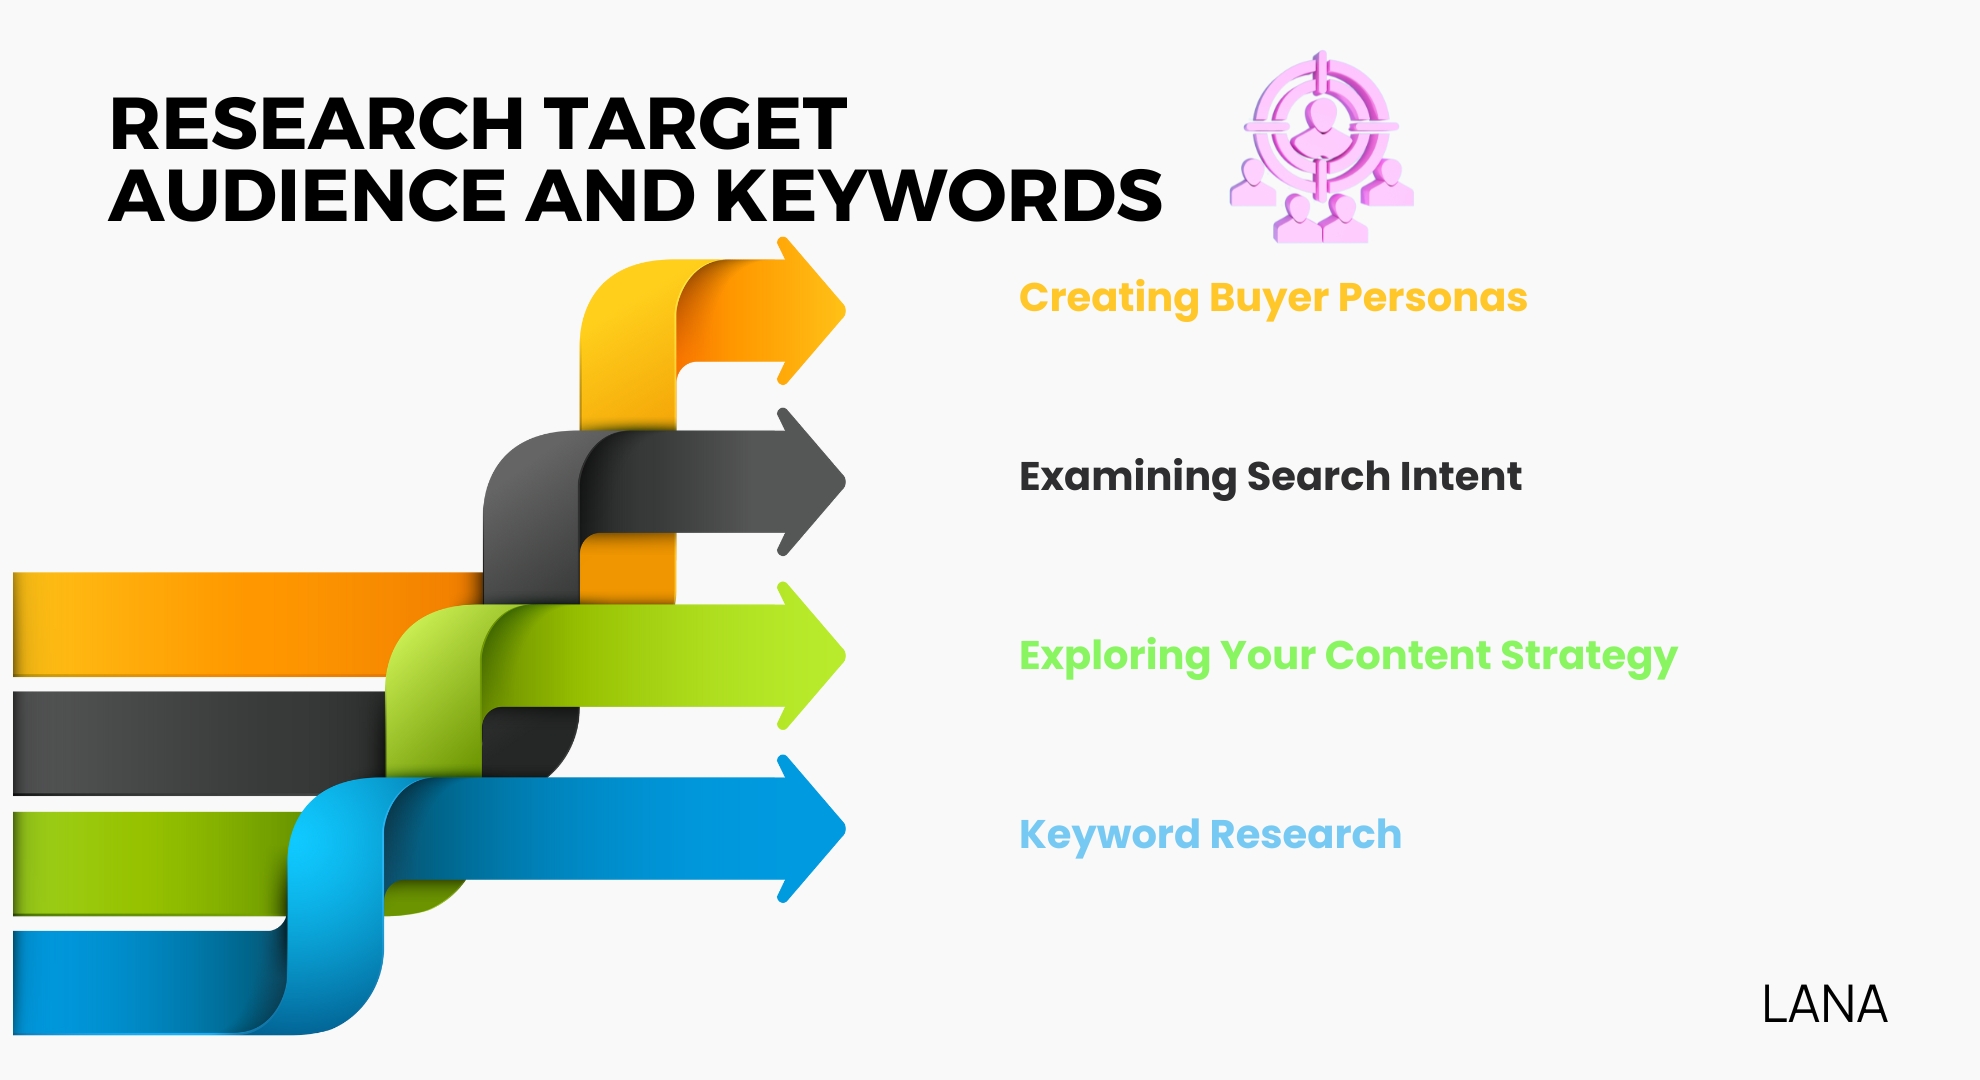 Research Target Audience and Keywords